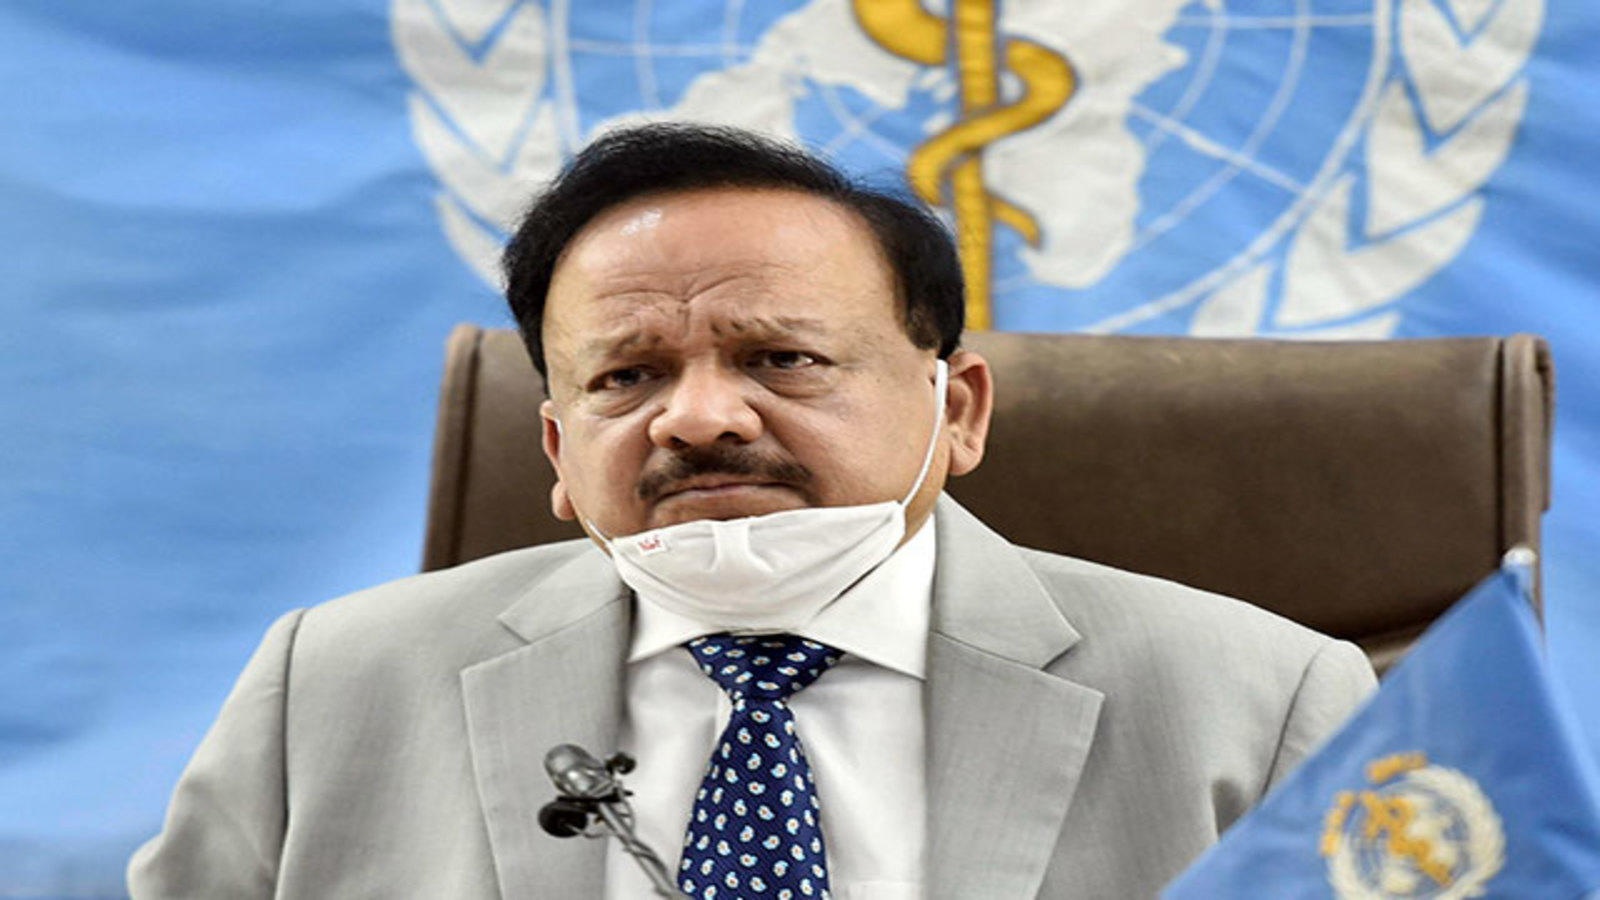 Health Minister Dr Harsh Vardhan: India is in much better place than rest of the world in COVID-19 containment